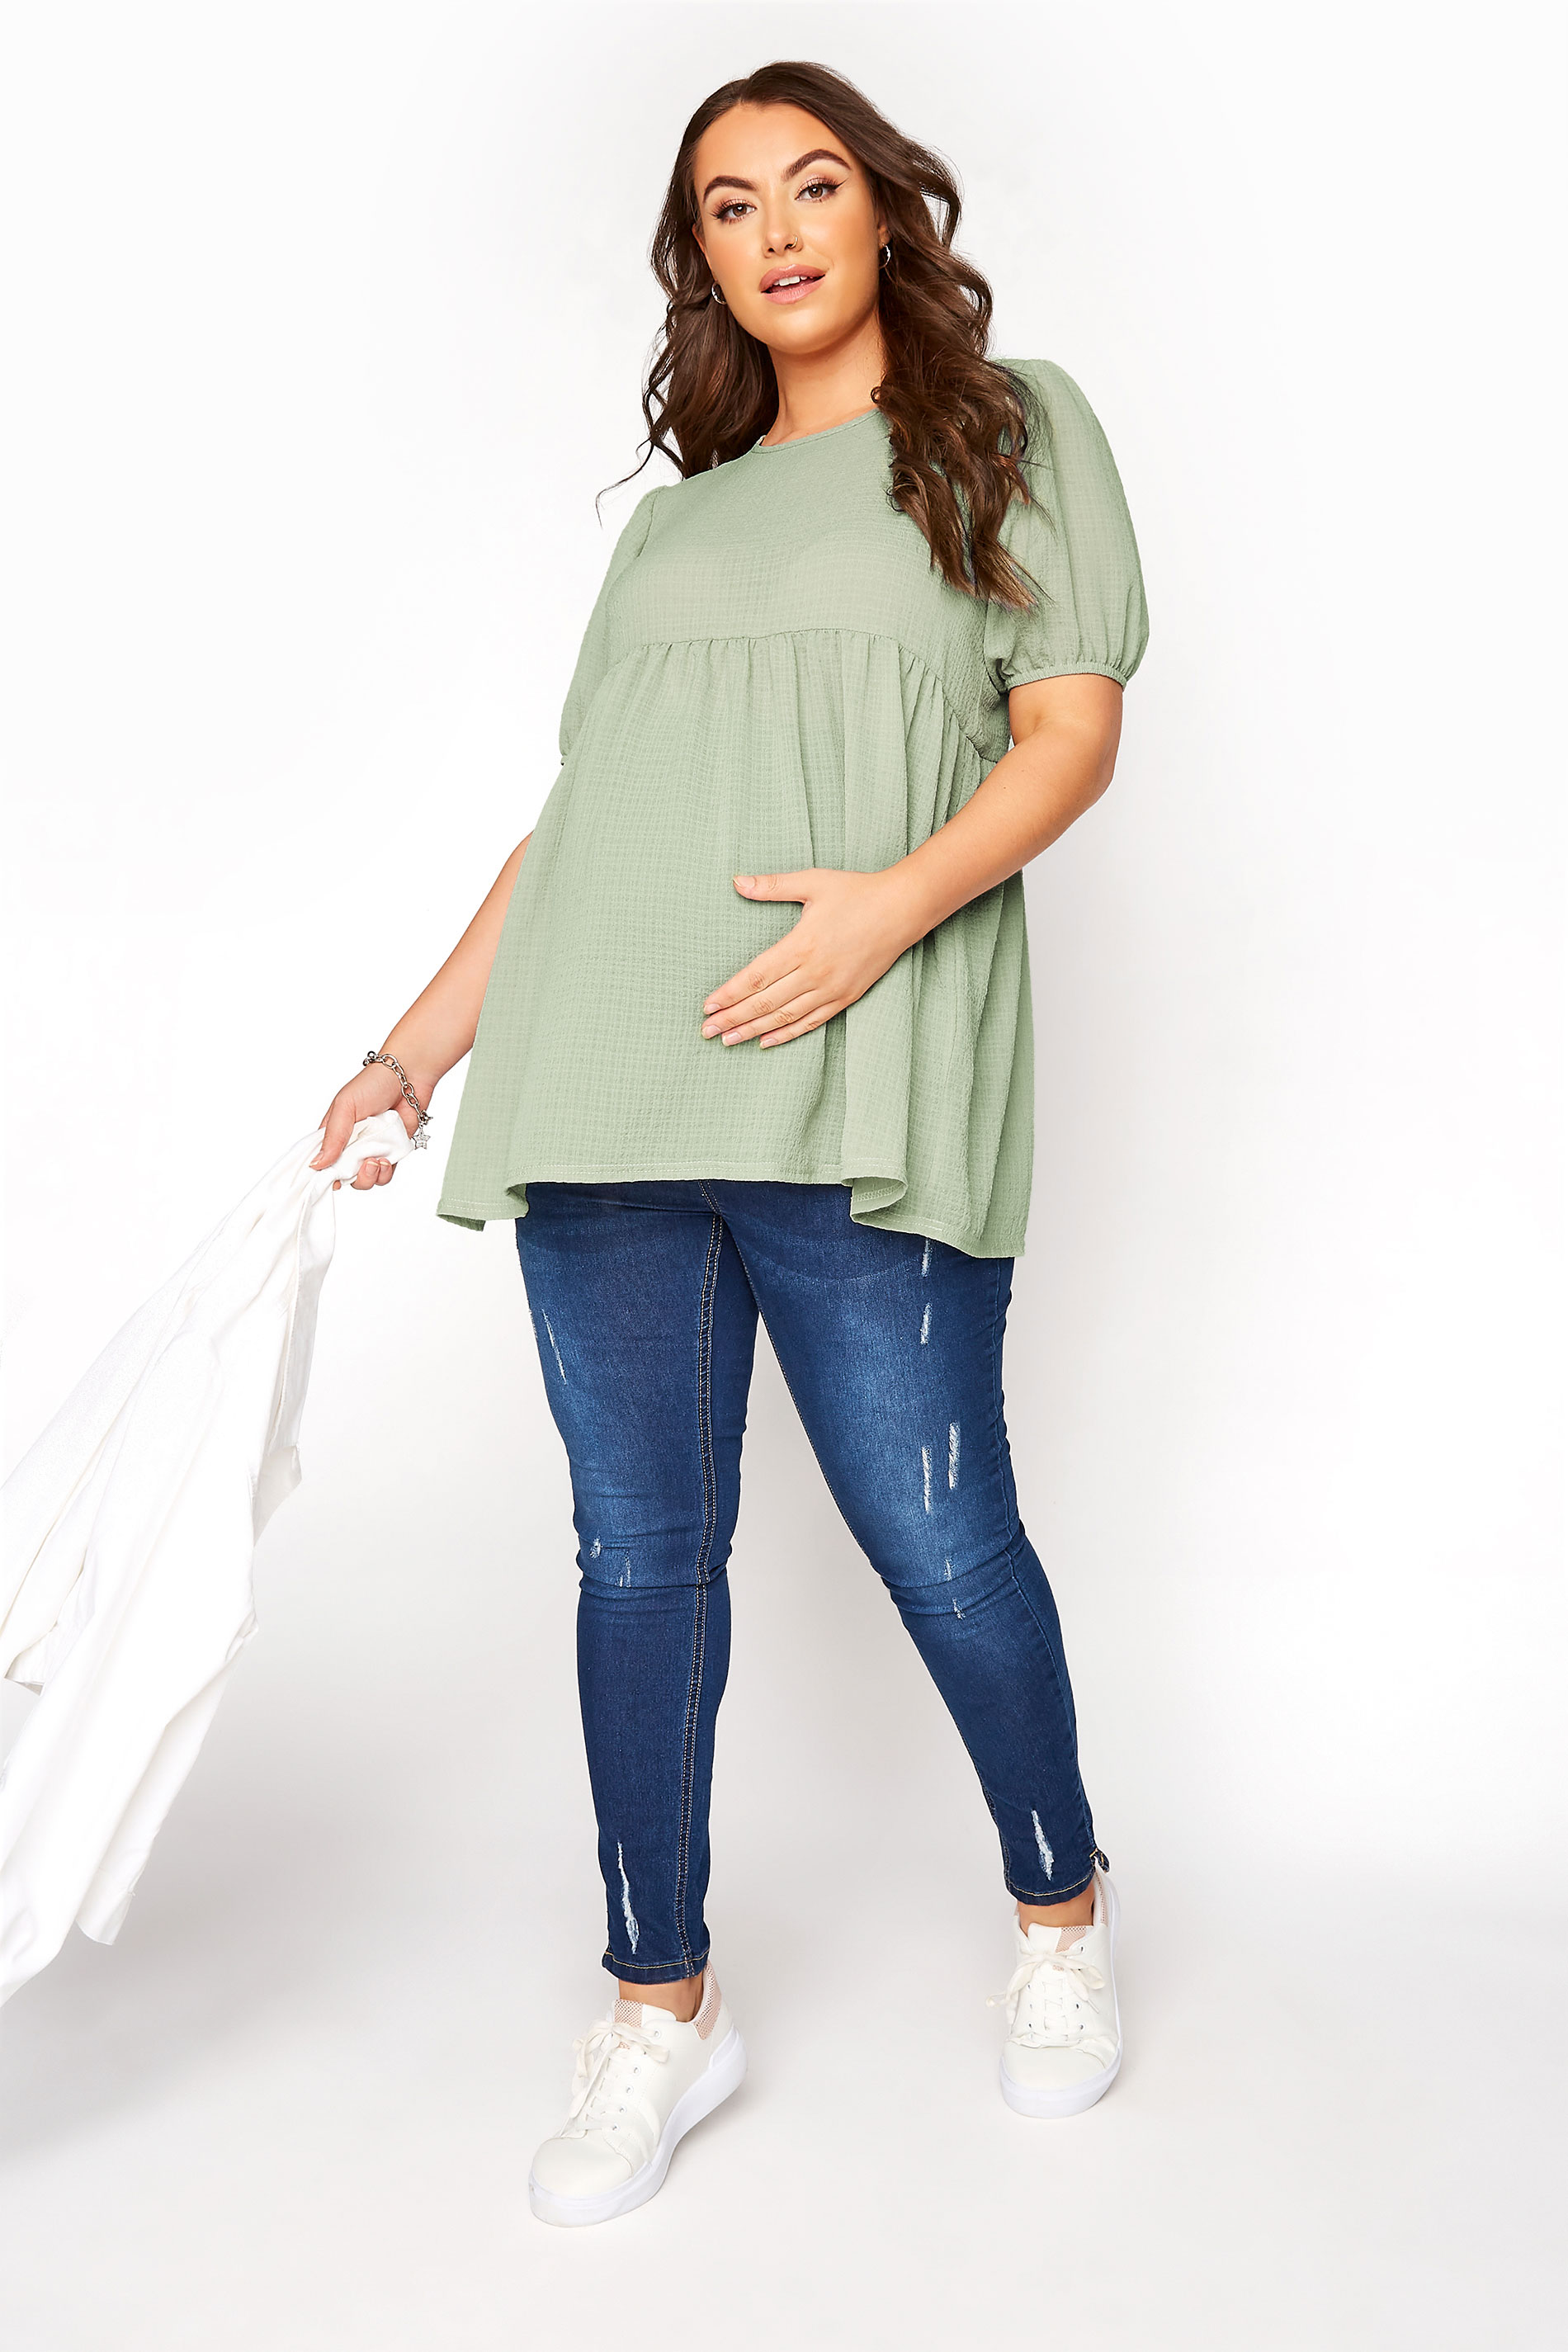 BUMP IT UP MATERNITY Sage Green Textured Puff Sleeve Smock Top